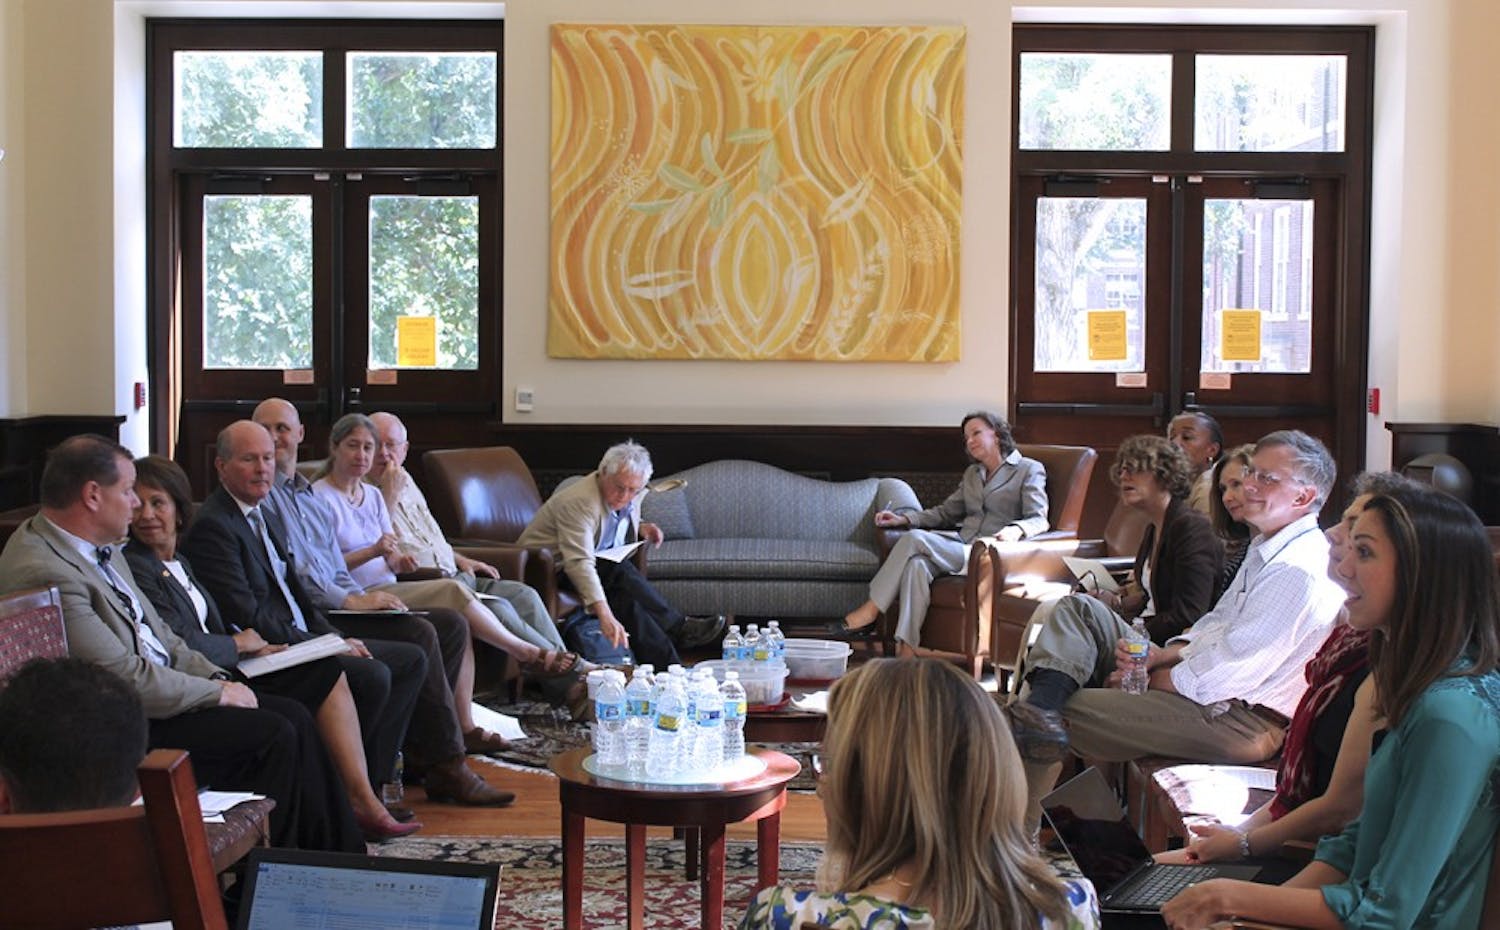 The faculty executive committee met to discuss university affairs at the Campus Y in the Queen Anne's Lounge on Sept.14, 2015.